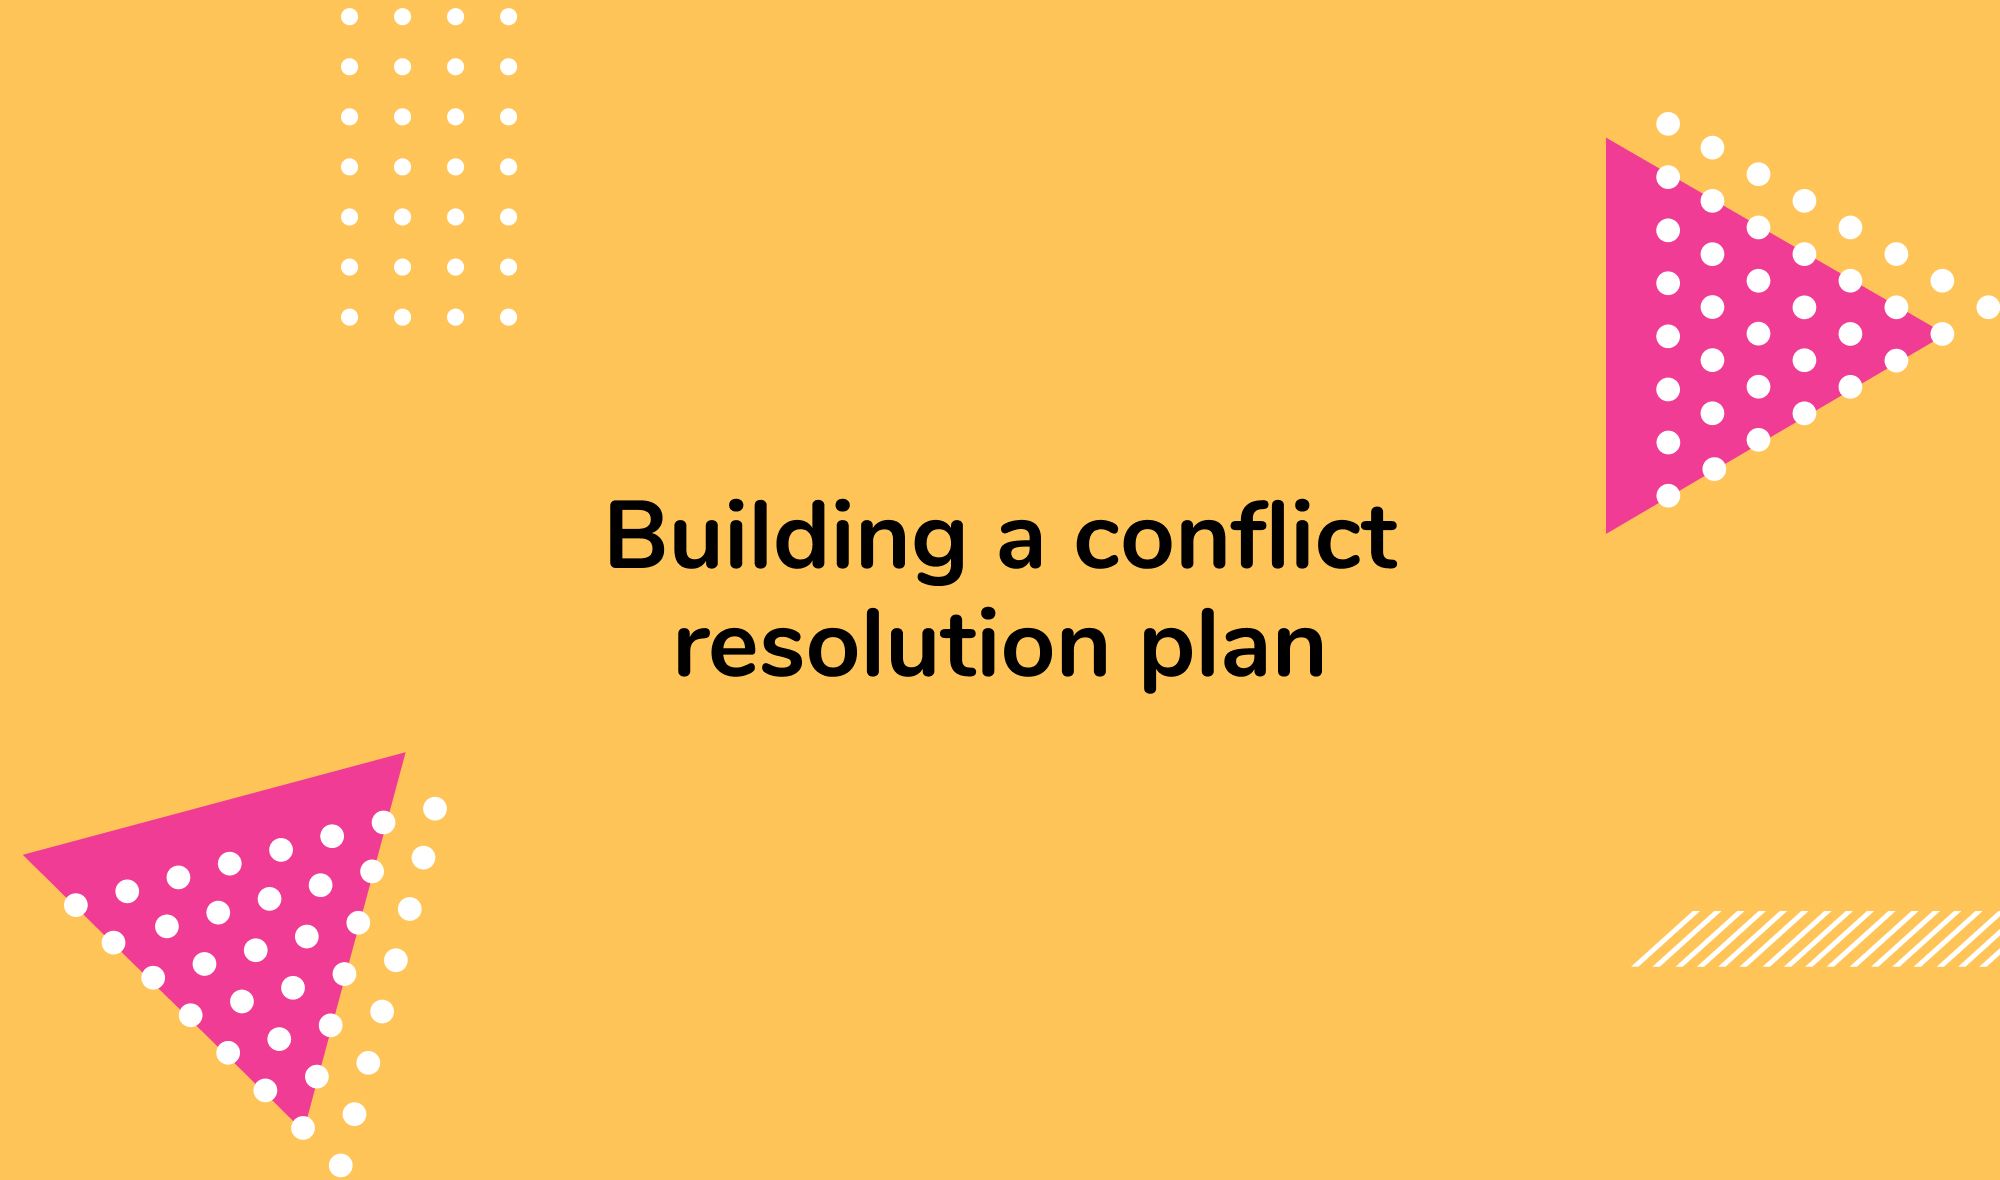 Building a conflict resolution plan: a template for future disputes